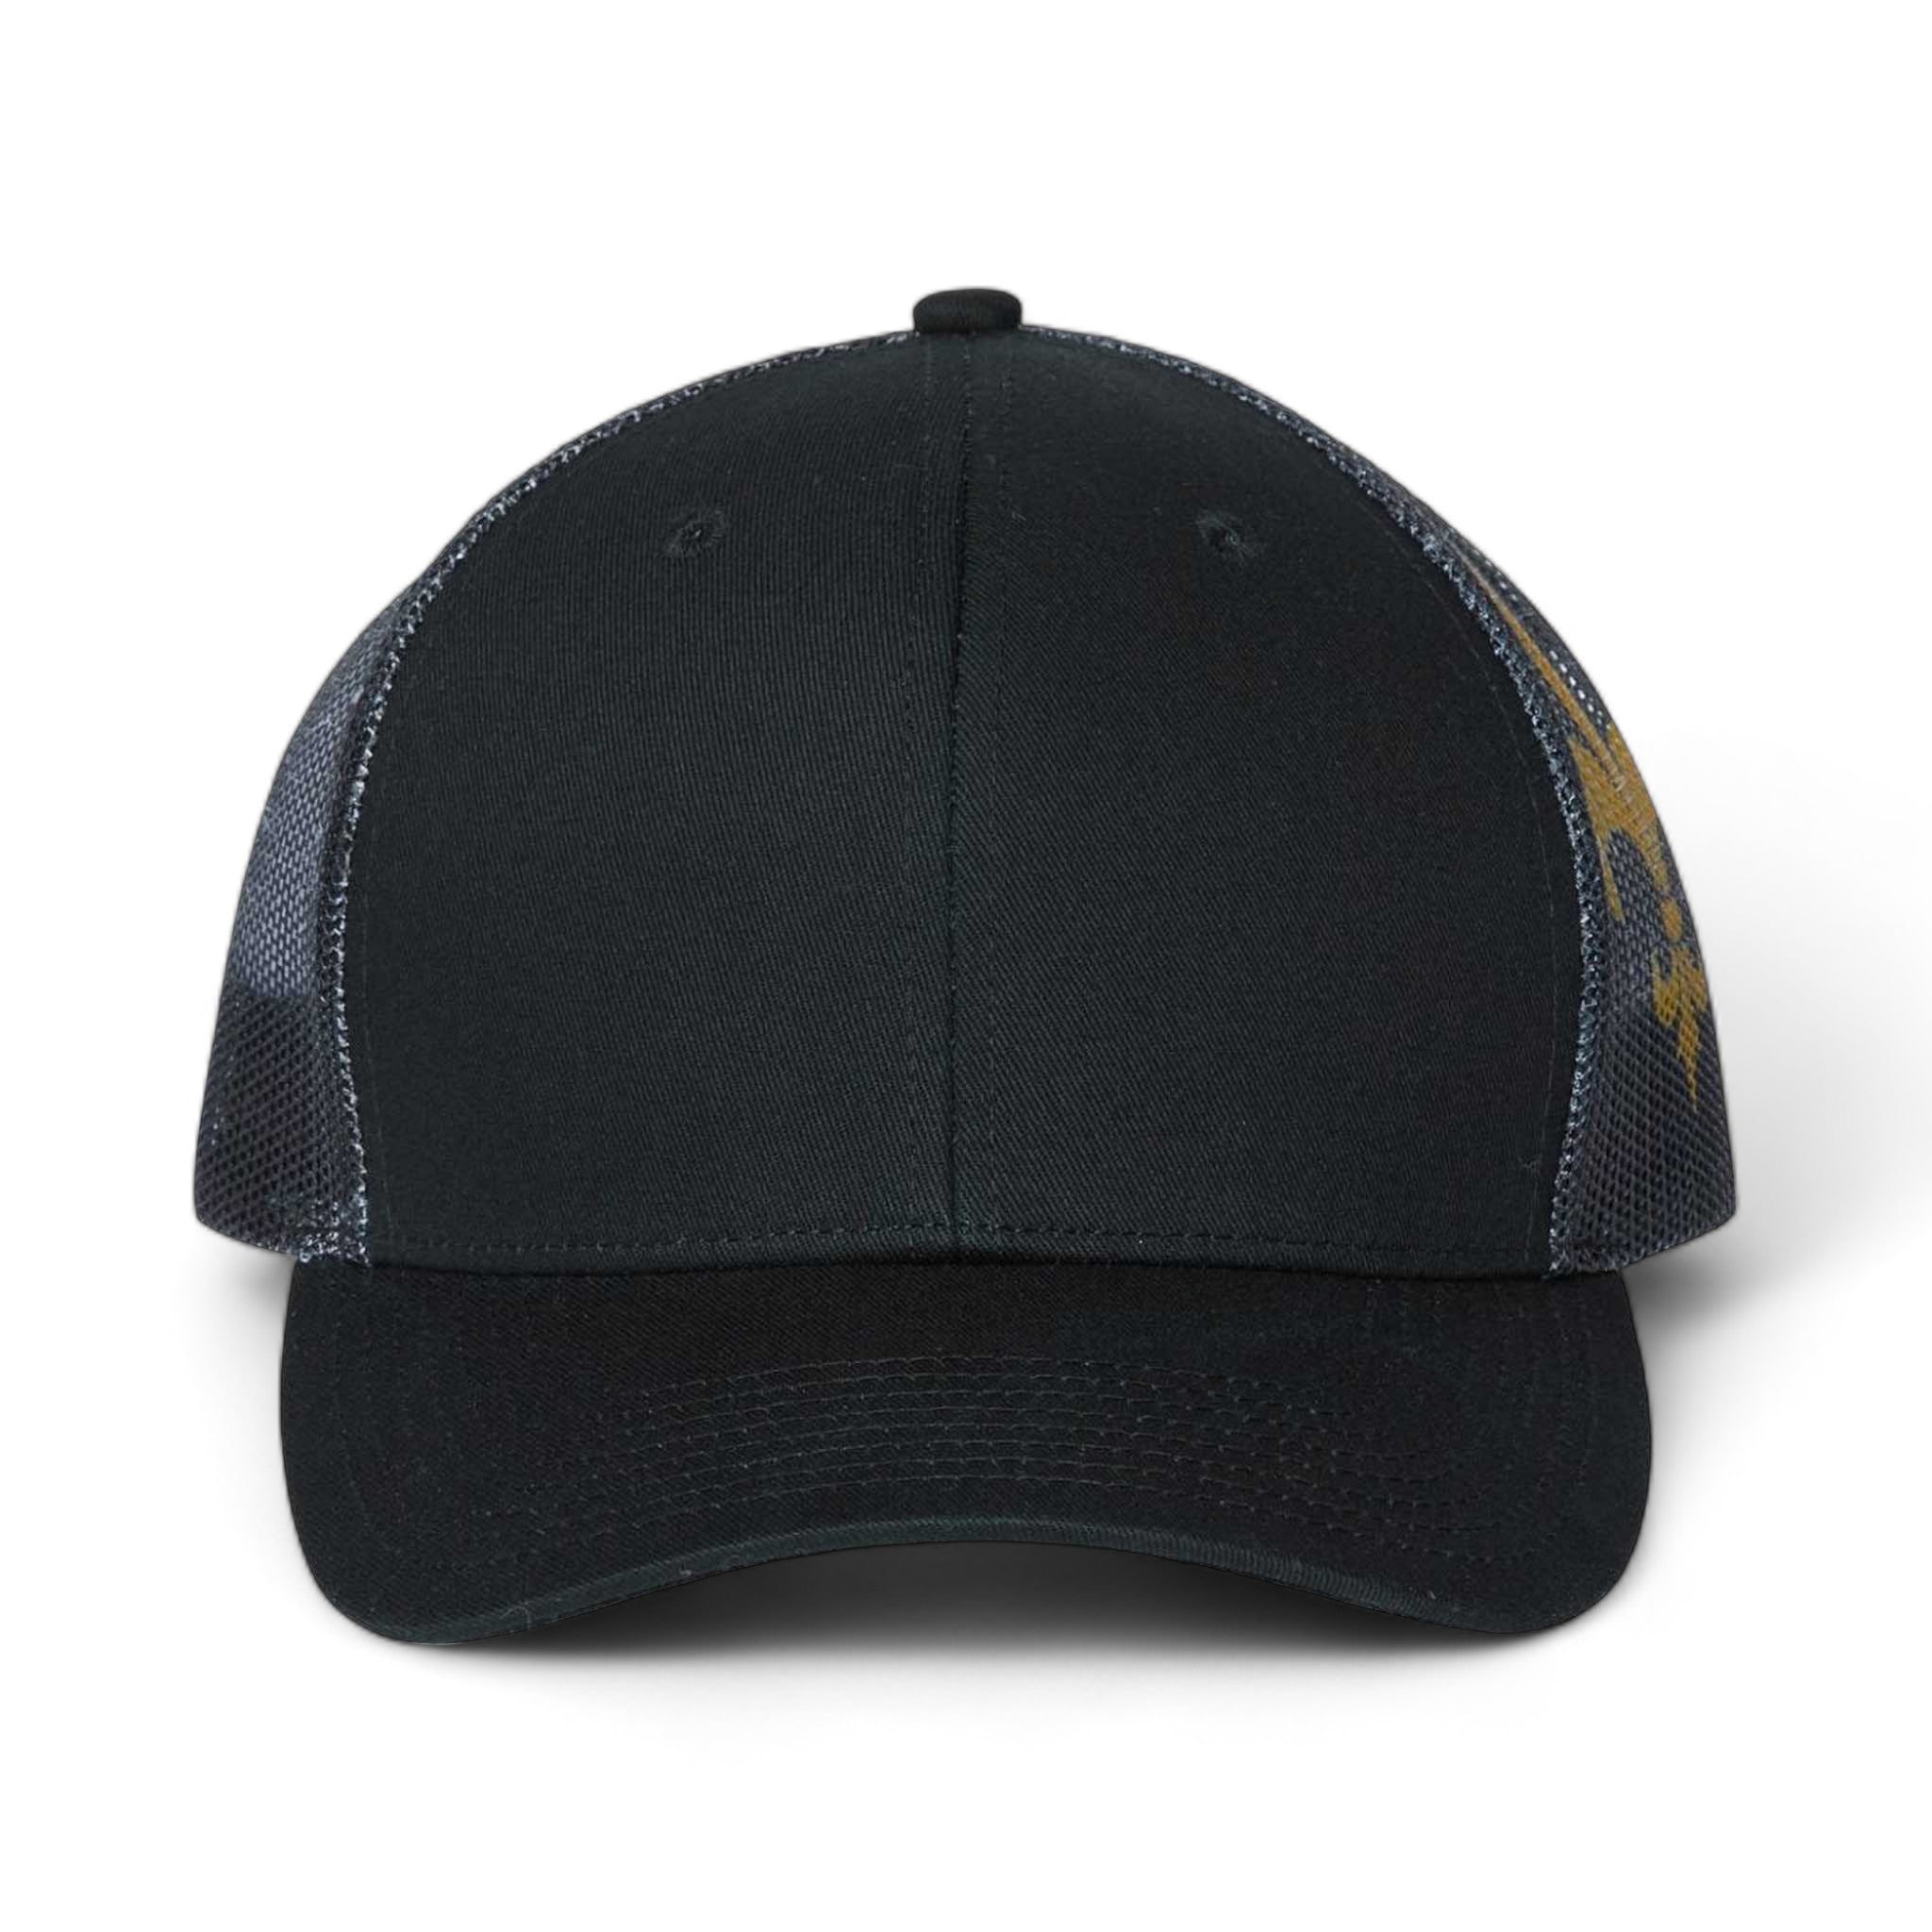 Front view of Kati S700M custom hat in black and black